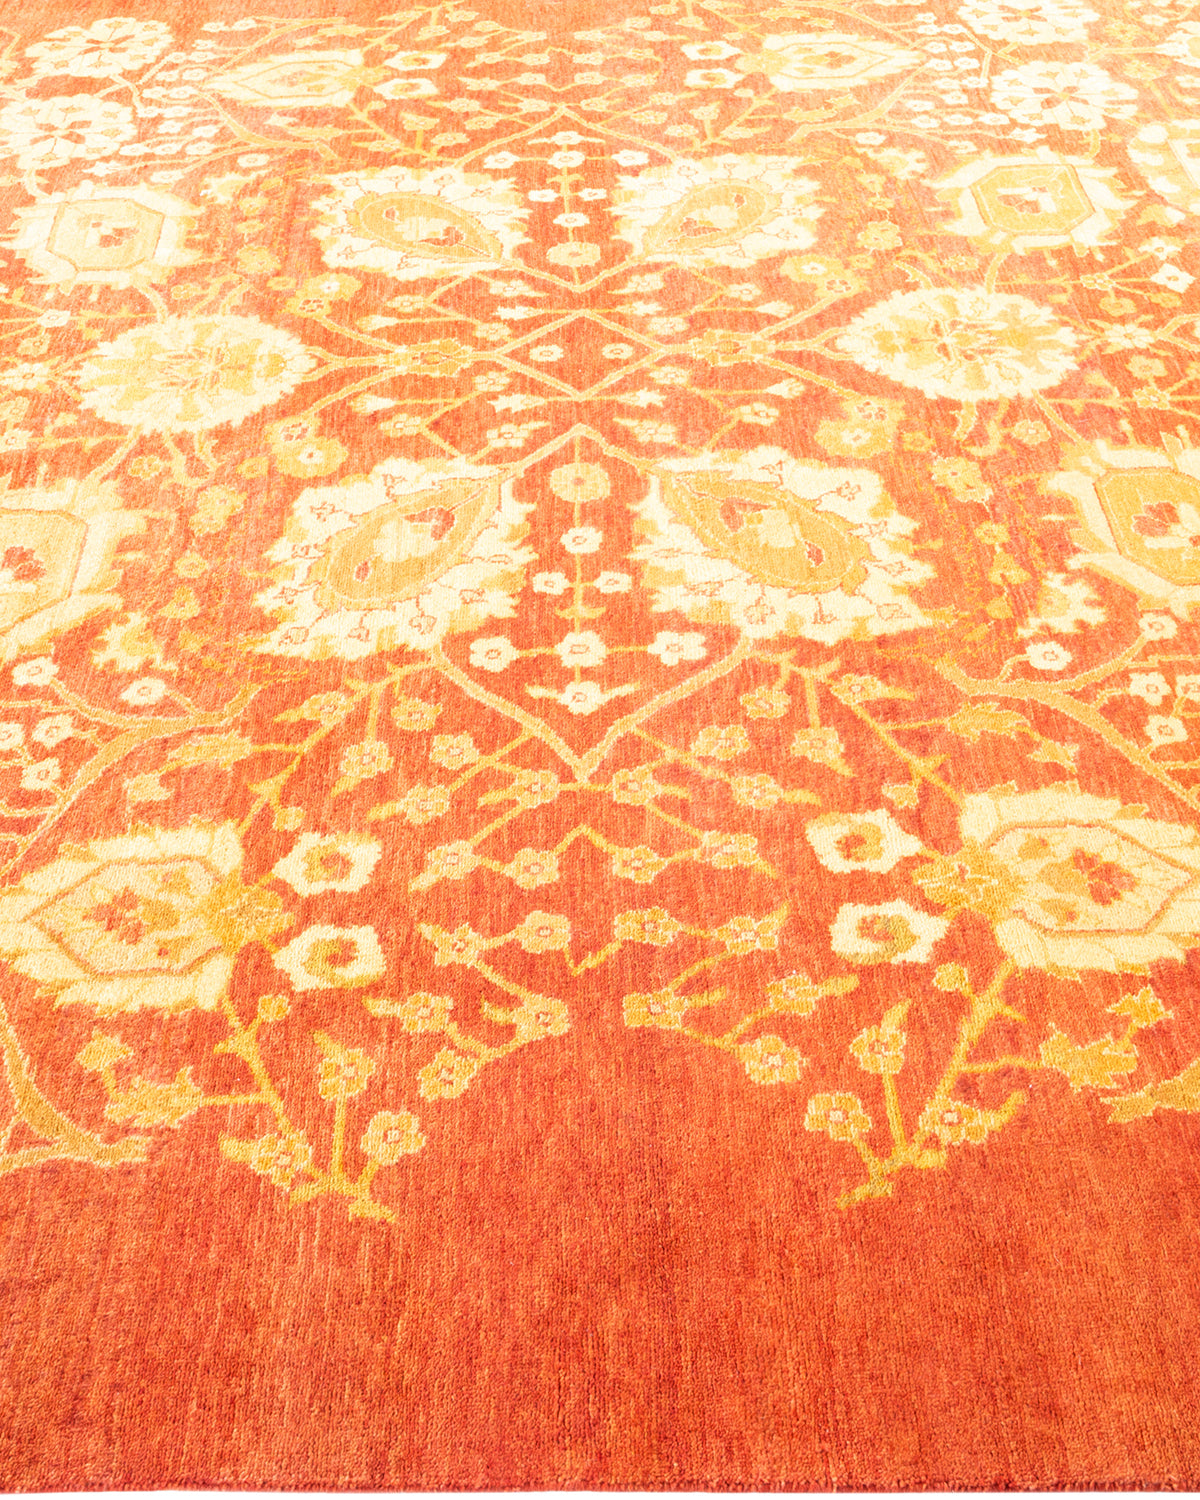 Eclectic, One-of-a-Kind Hand-Knotted Area Rug  - Orange, 7' 8" x 9' 9"